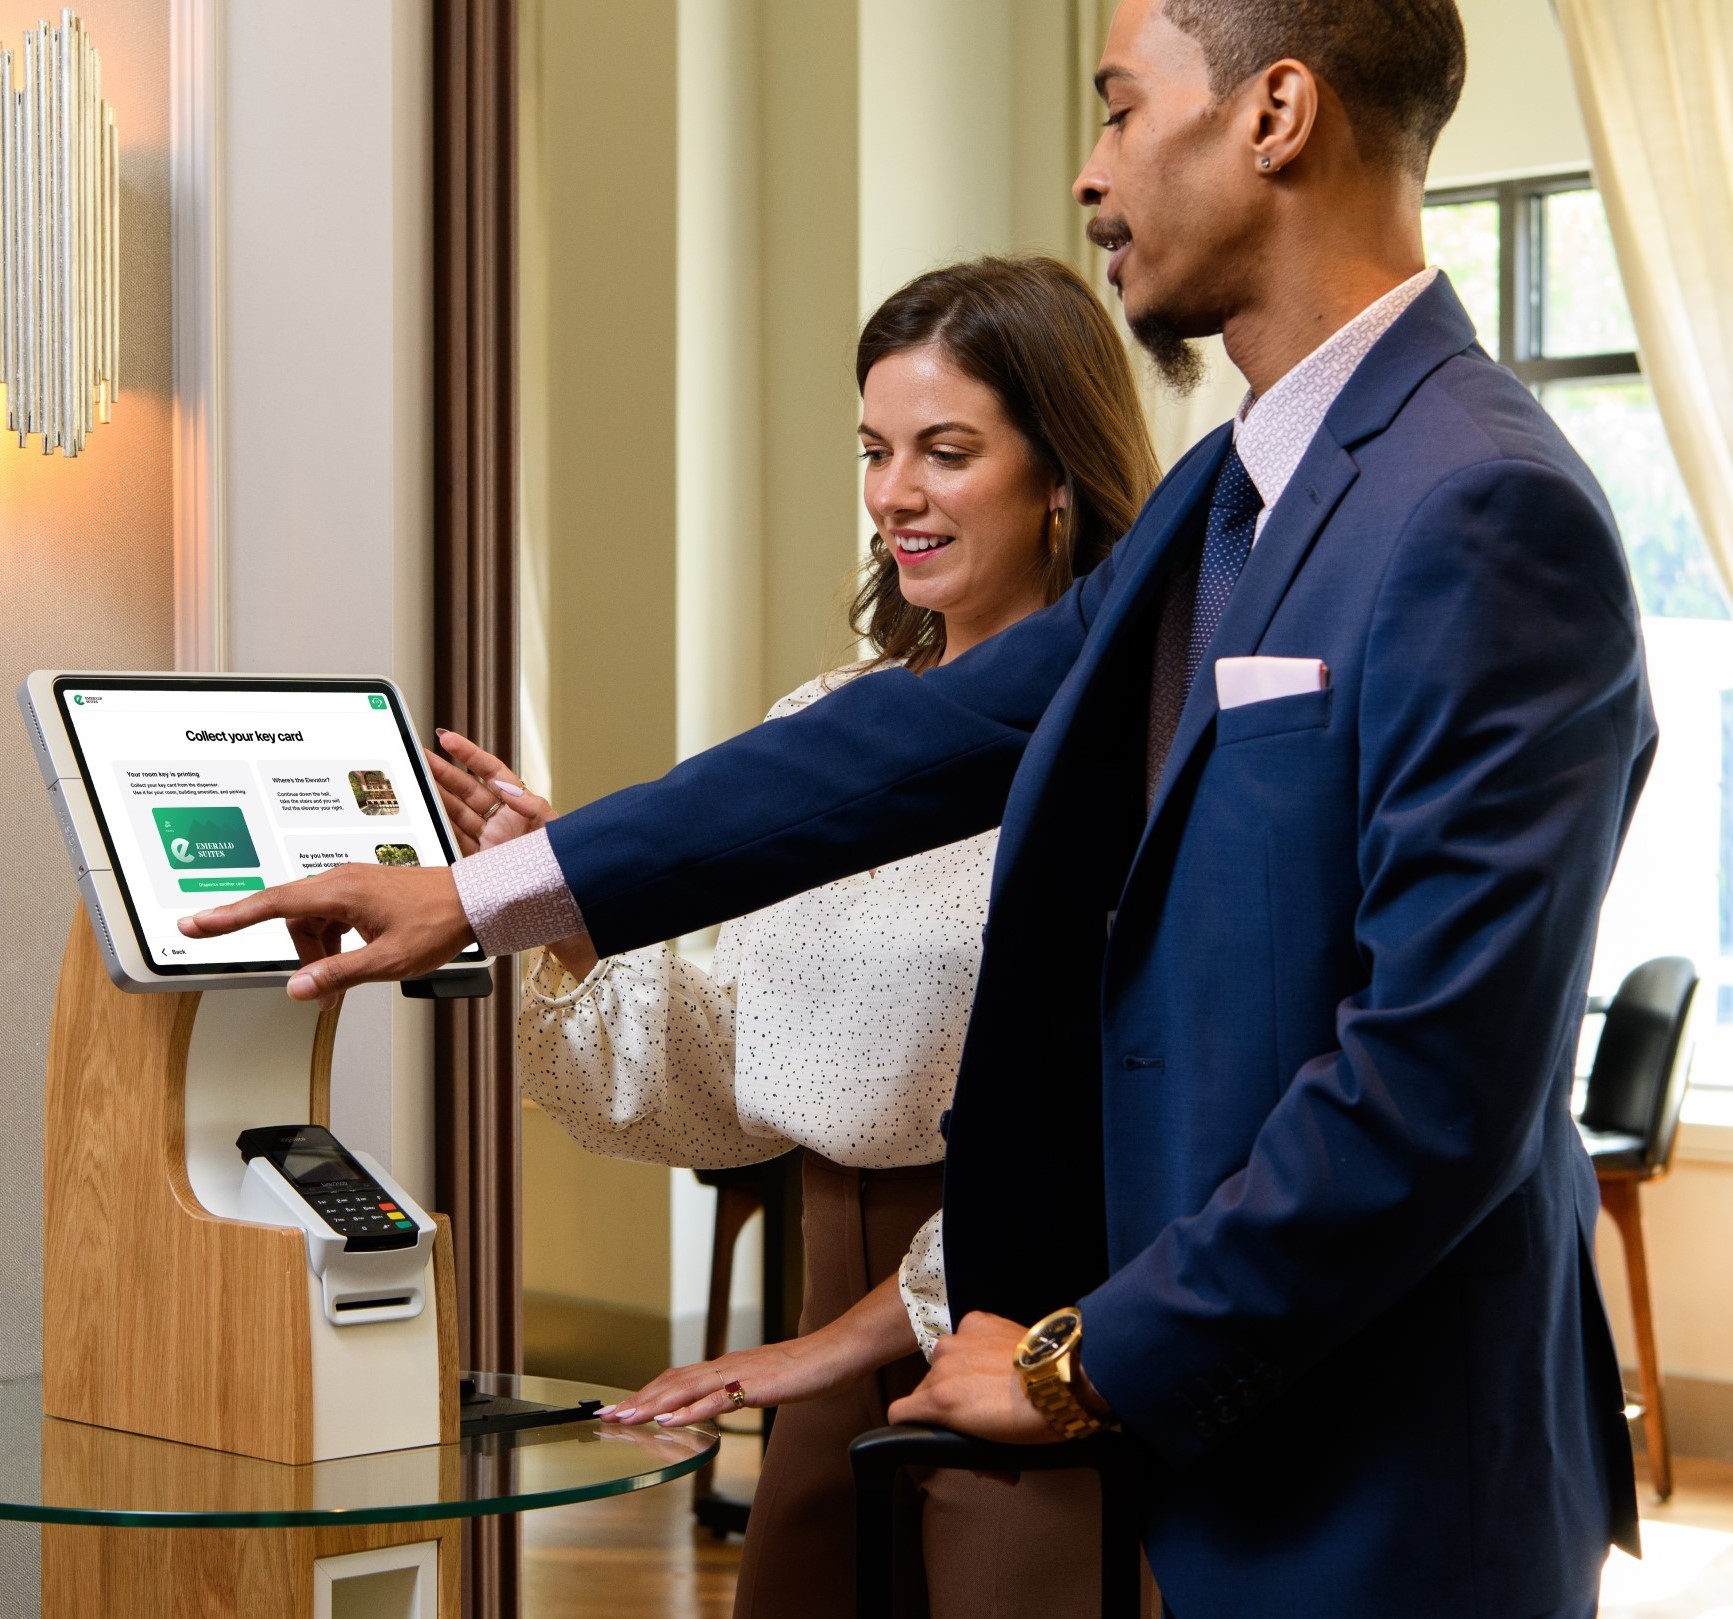 Add a kiosk to your lobby to address 100% of guests and free up staff time